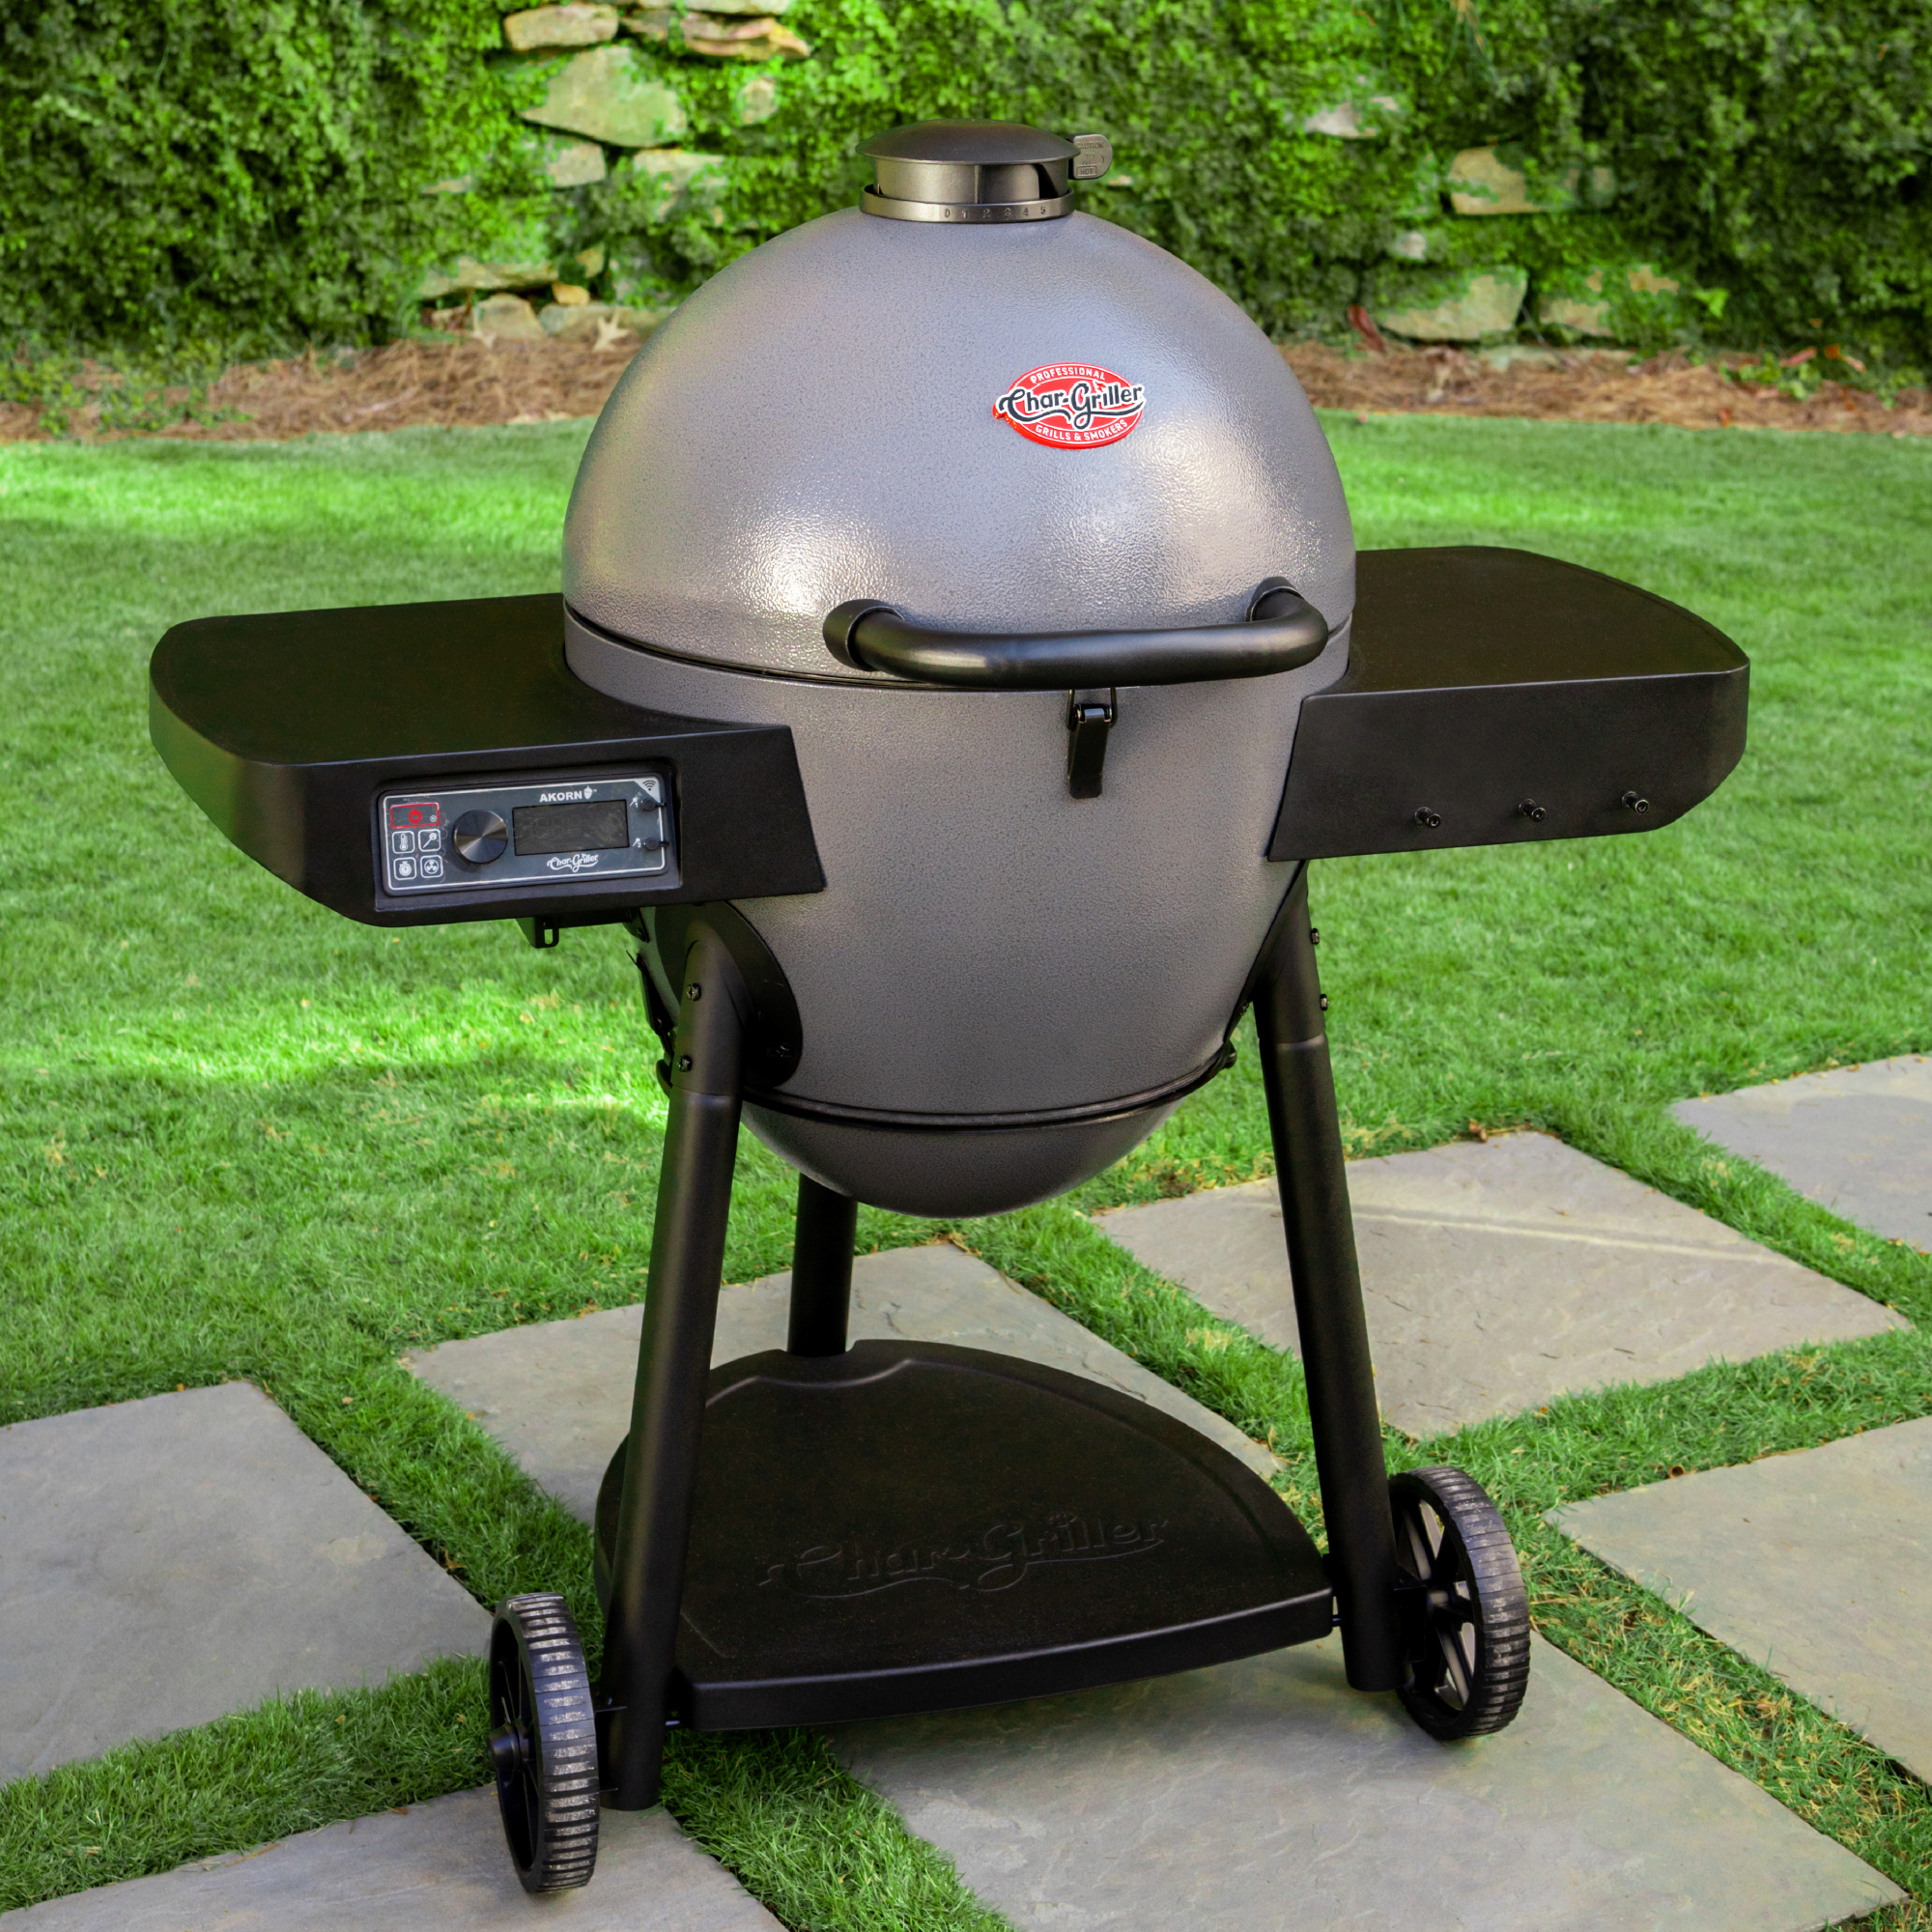 Auto Kamado Charcoal Grill in Gray - image 4 of 15